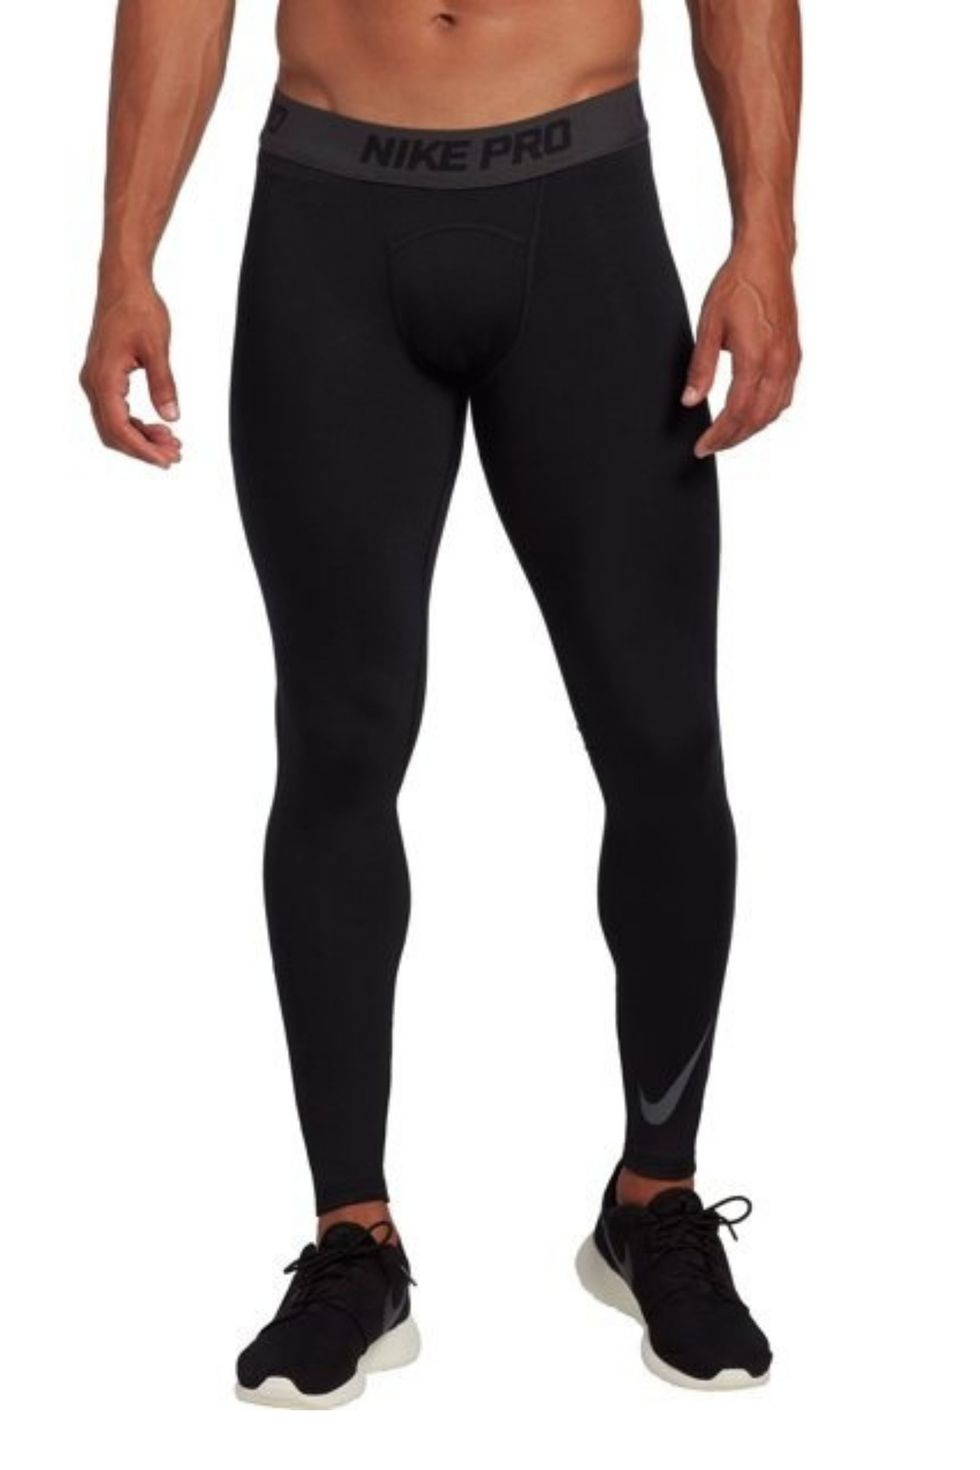 Men's Compression Thermal Fleece Lined Sports Leggings For Running, Hiking  Or Working Out